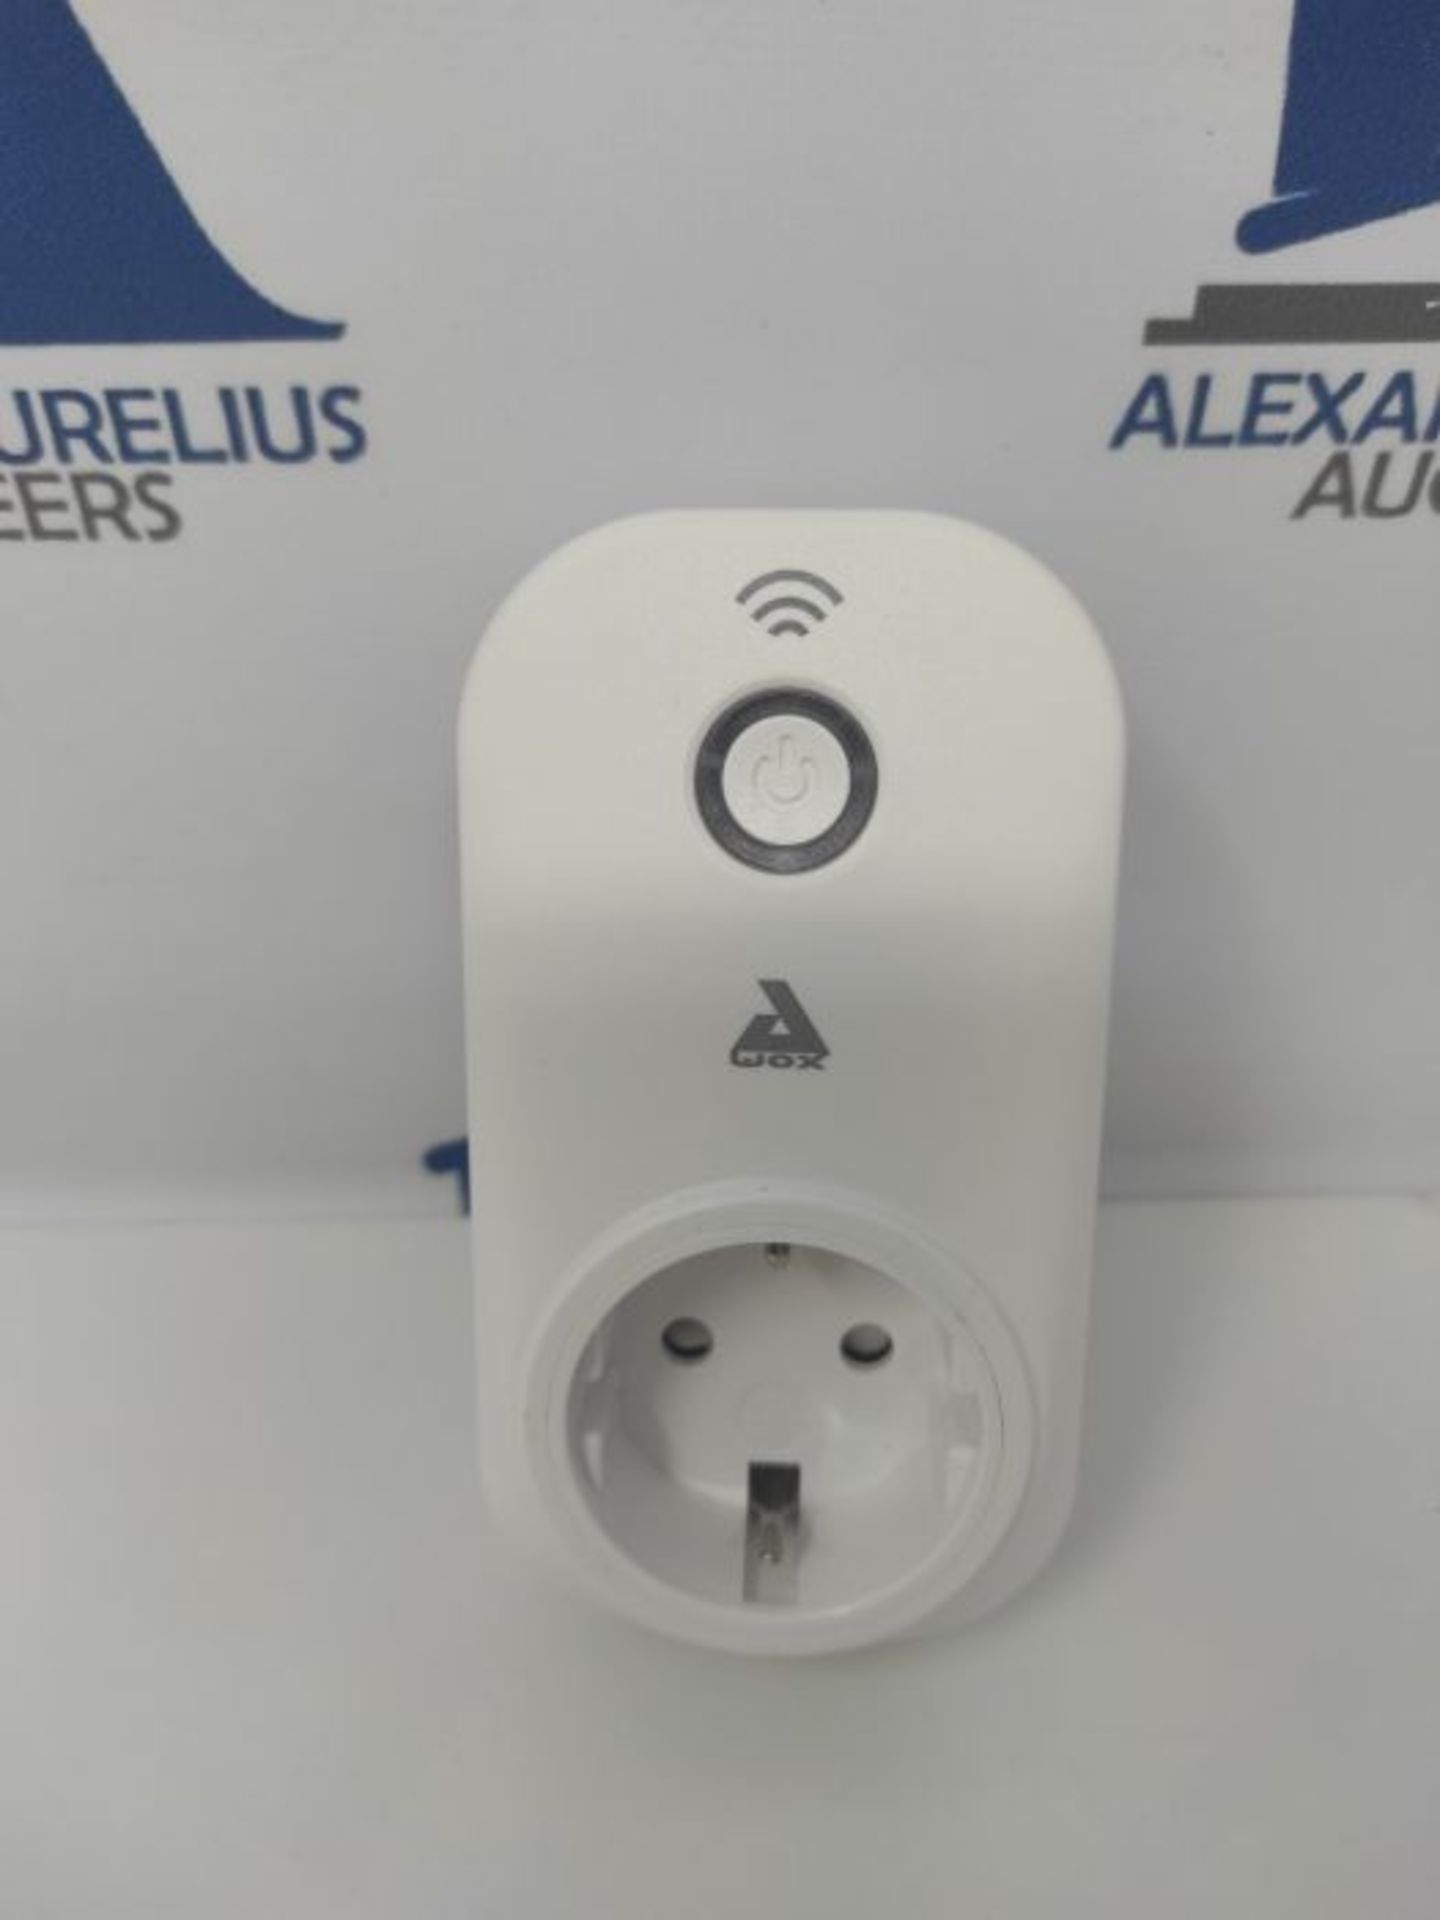 EGLO Connect Plug Plus Smart Home Plug for Voice Control, Socket with WLAN and Energy - Image 3 of 3